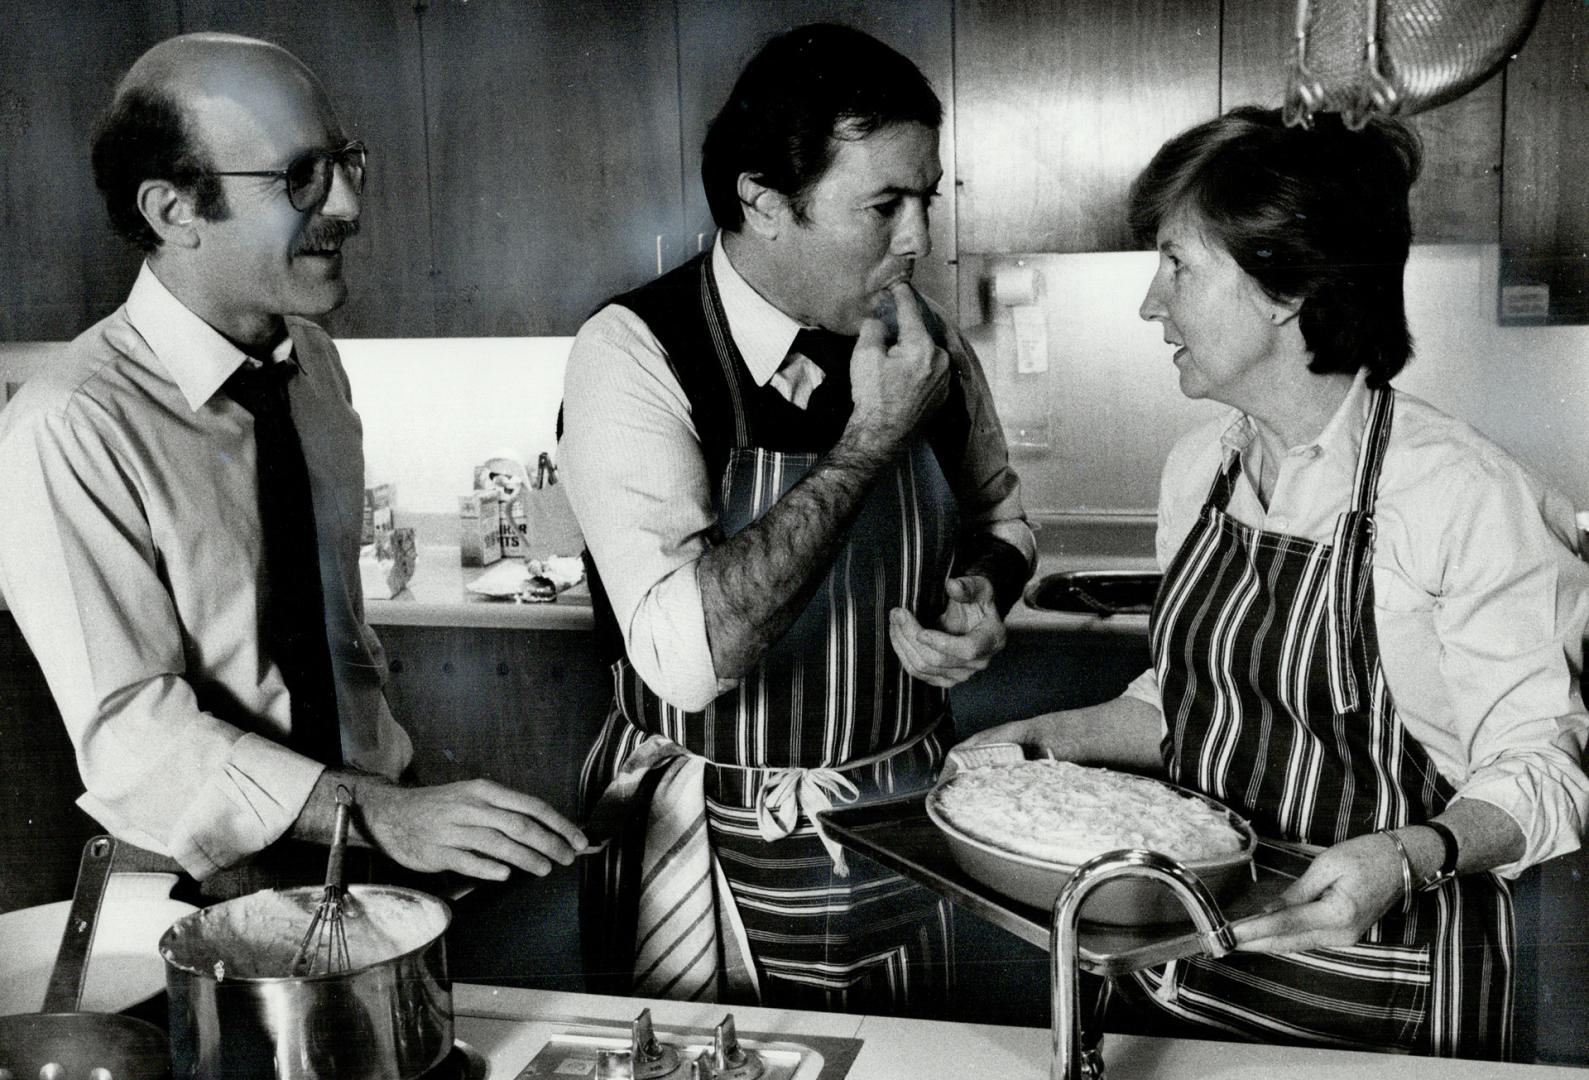 Tasting time, Chef Jacques Pepin looks pleased as he tastes a Gratin Permentier prepared by Star home economist Mary McGrath. Food writer Jim White lo(...)